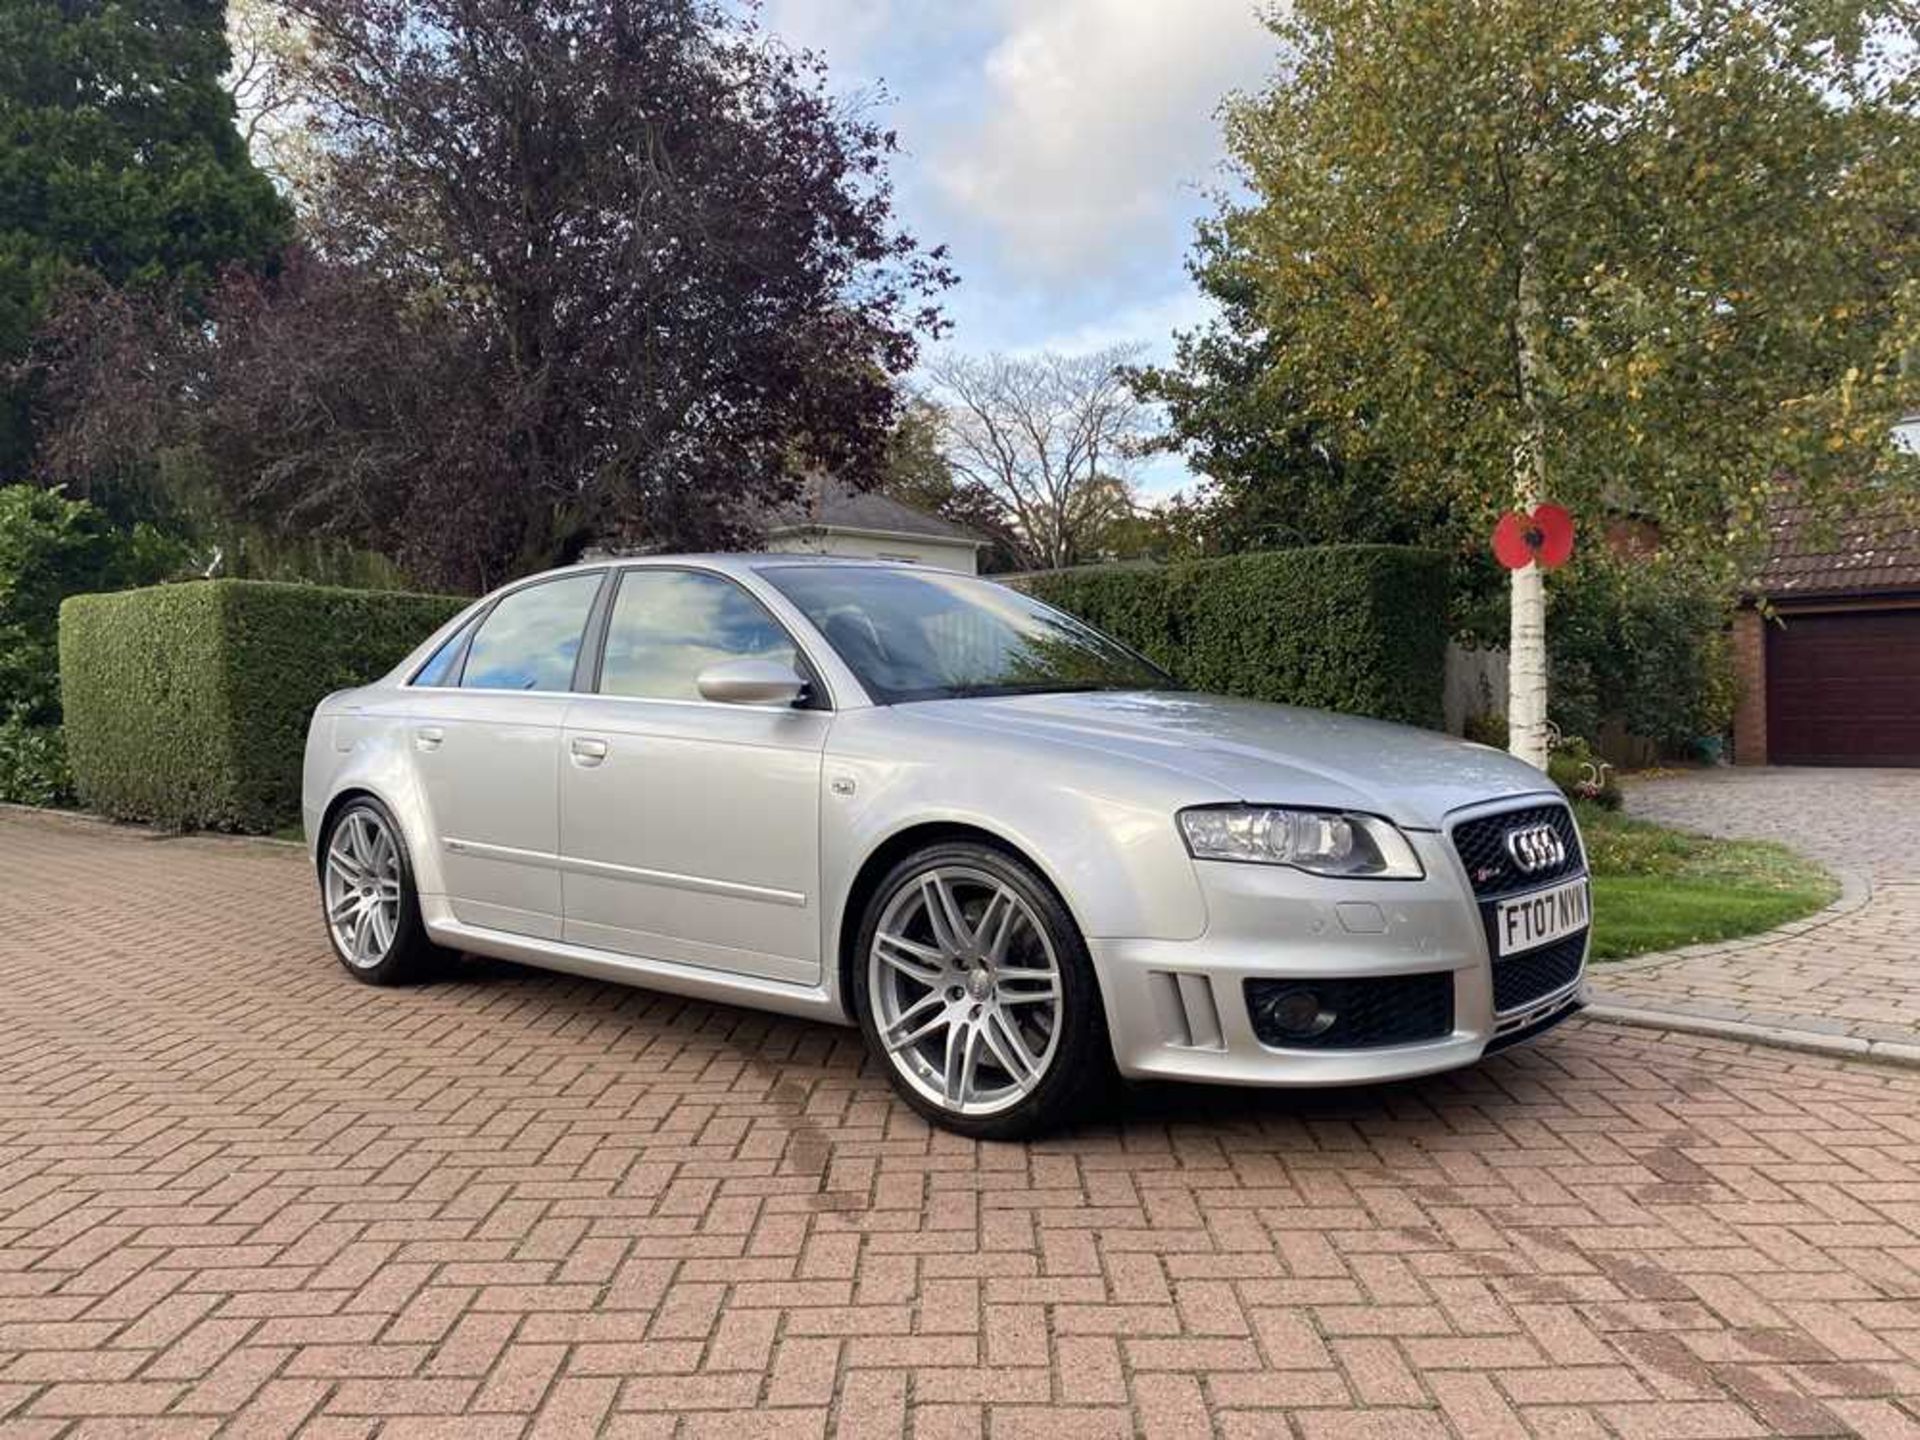 2007 Audi RS4 Saloon One owner and just c.60,000 miles from new - Bild 5 aus 86